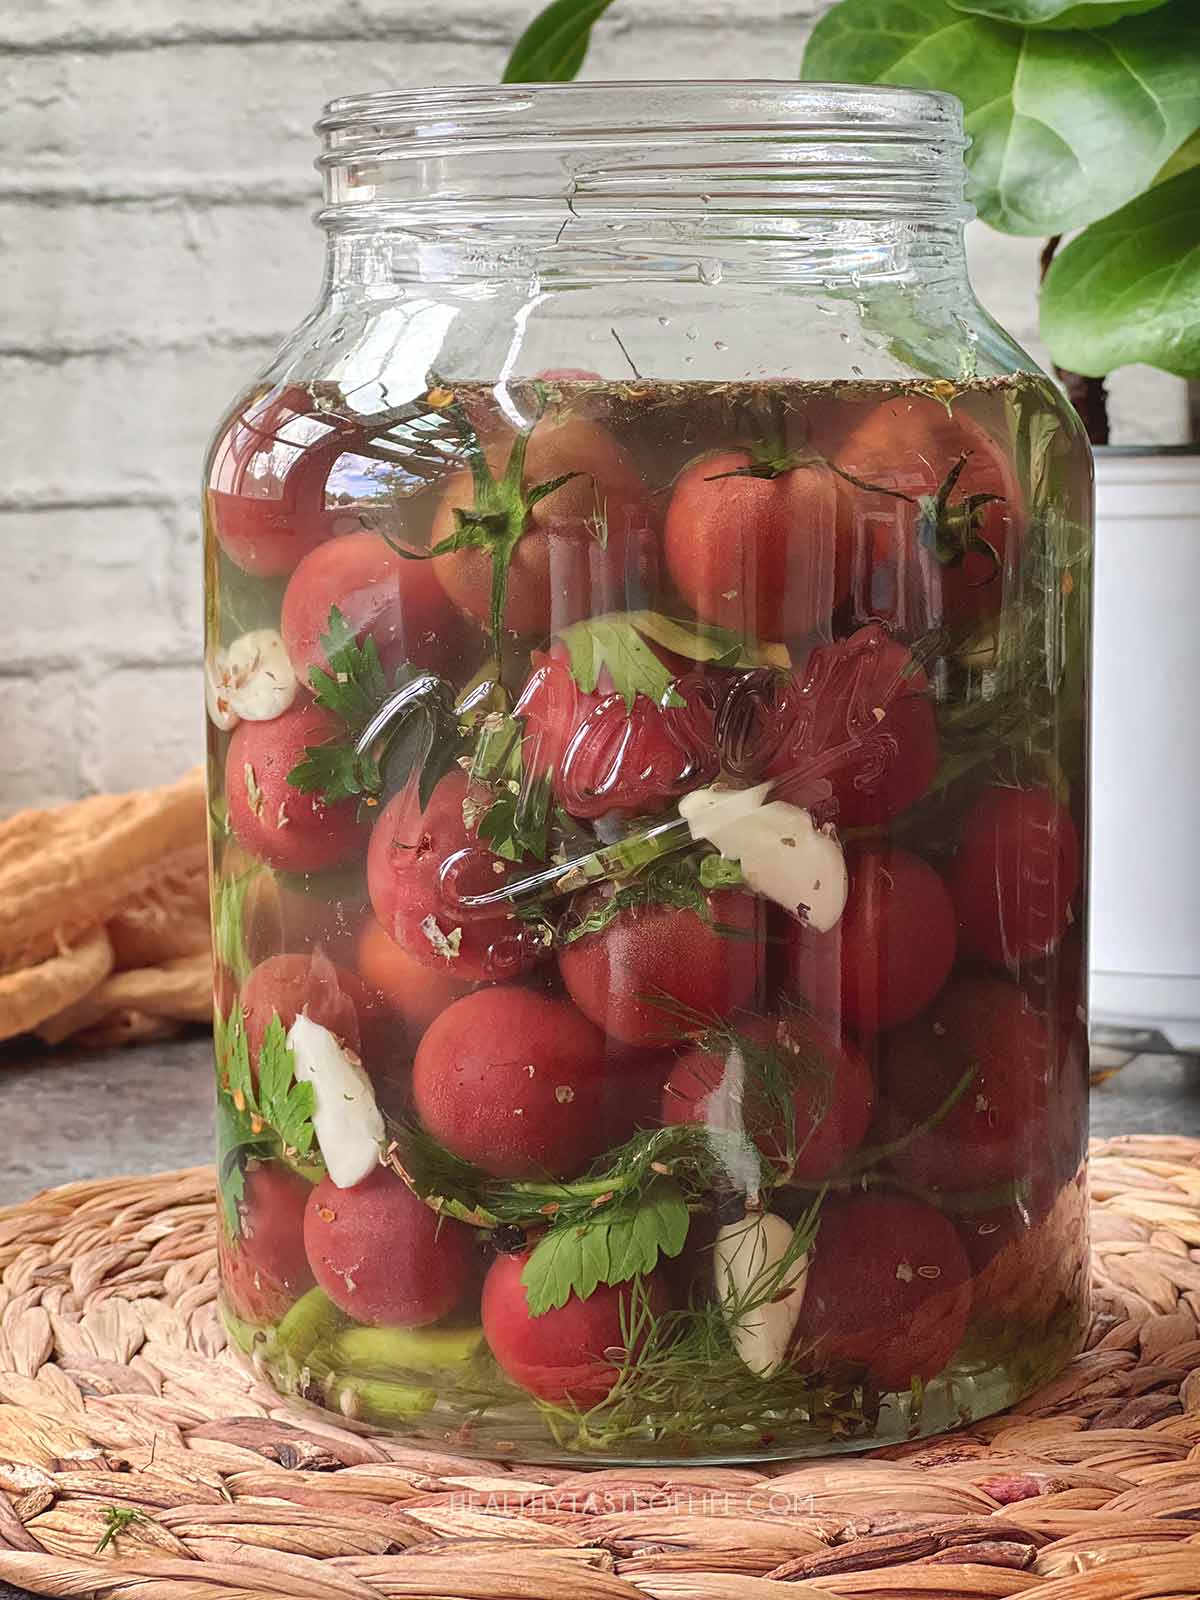 Fermenting cherry tomatoes in galon size glass jar.